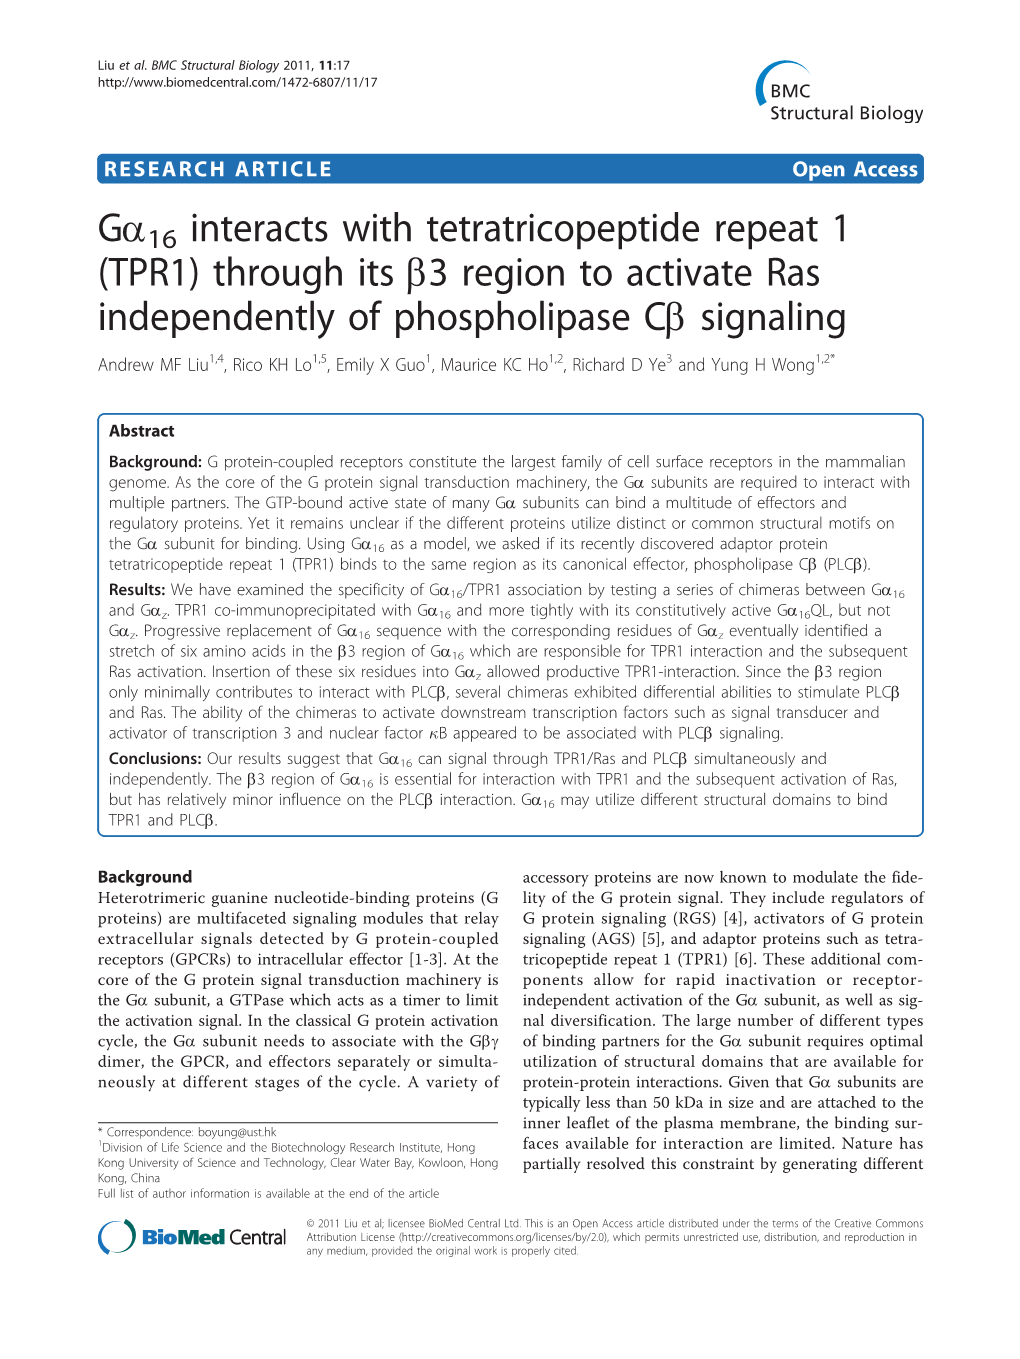 Ga16 Interacts with Tetratricopeptide Repeat 1